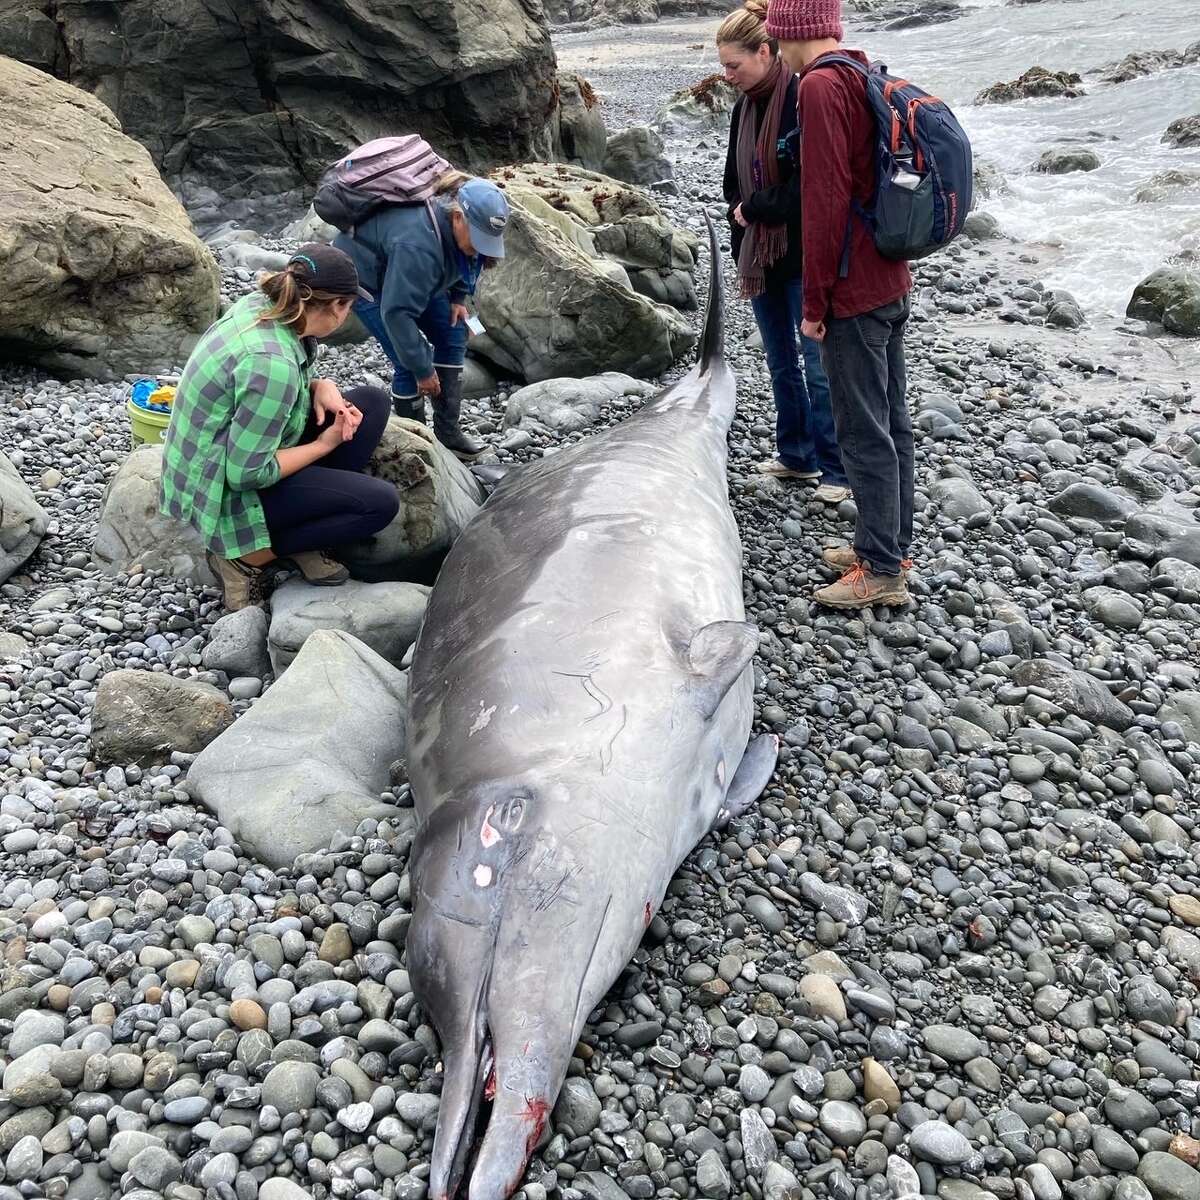 A team of scientists with the Noyo Center for Marine Science in Fort Brag performed a necropsy in collaboration with the Cal Academy of Sciences in San Francisco and the Marine Mammal Center in Sausalito.